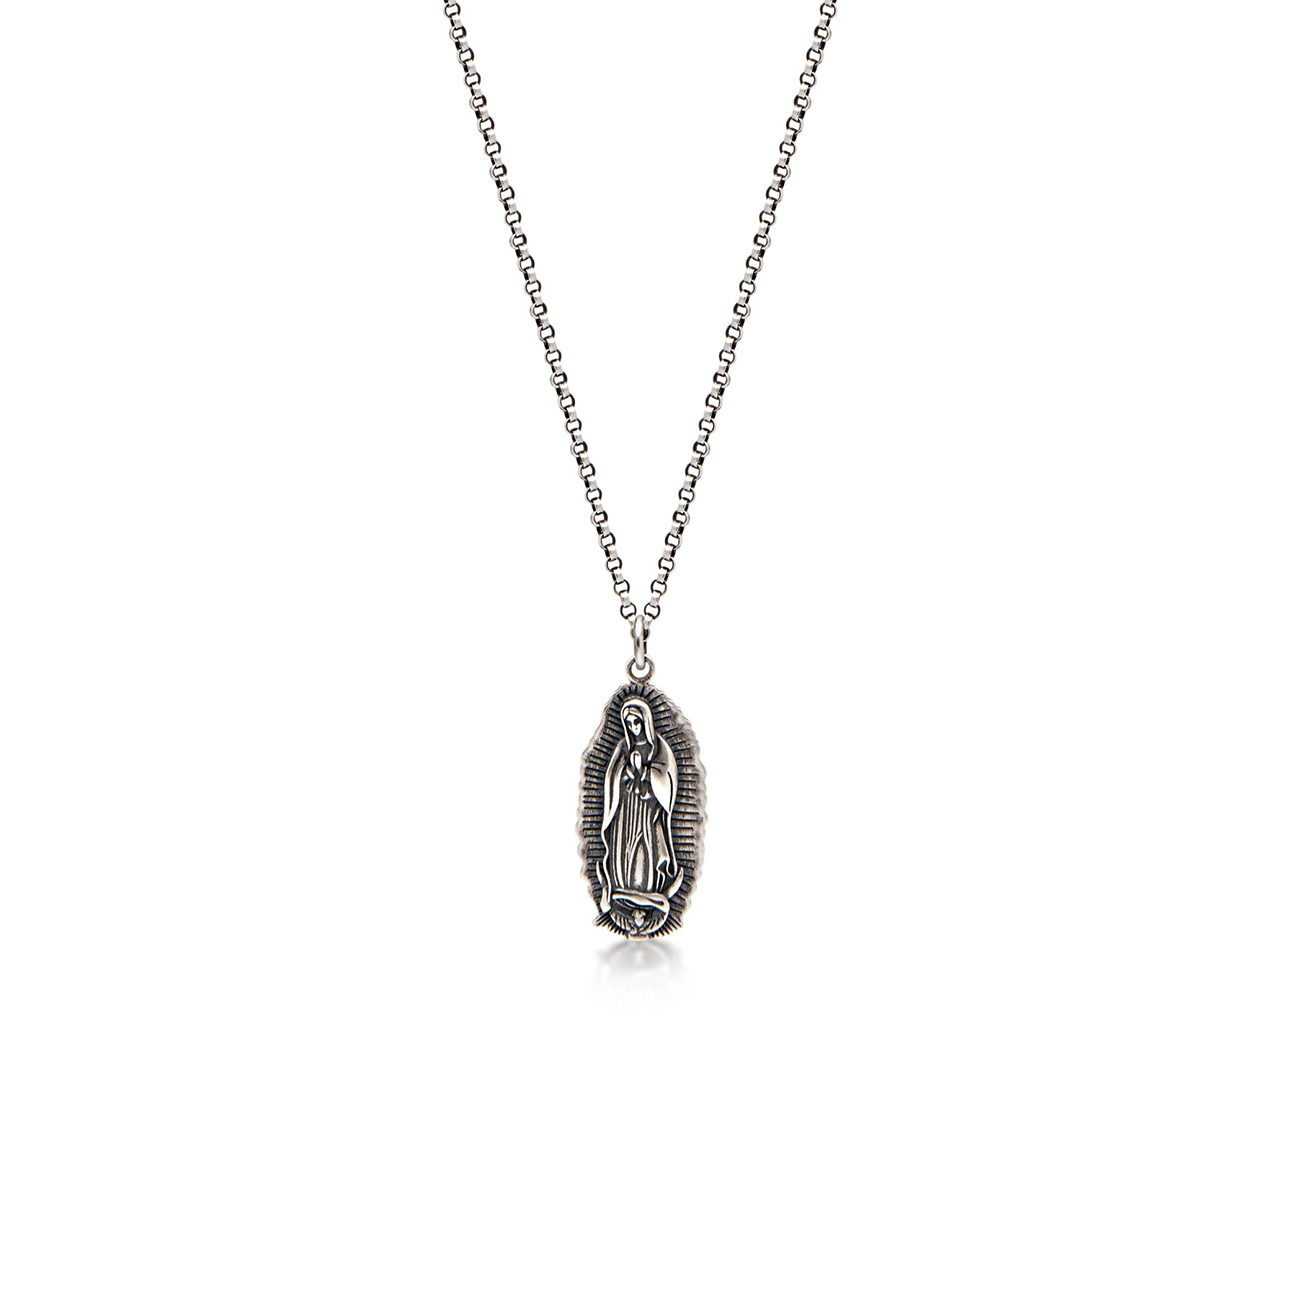 Nialaya Men's Necklace with Our Lady of Guadalupe Pendant